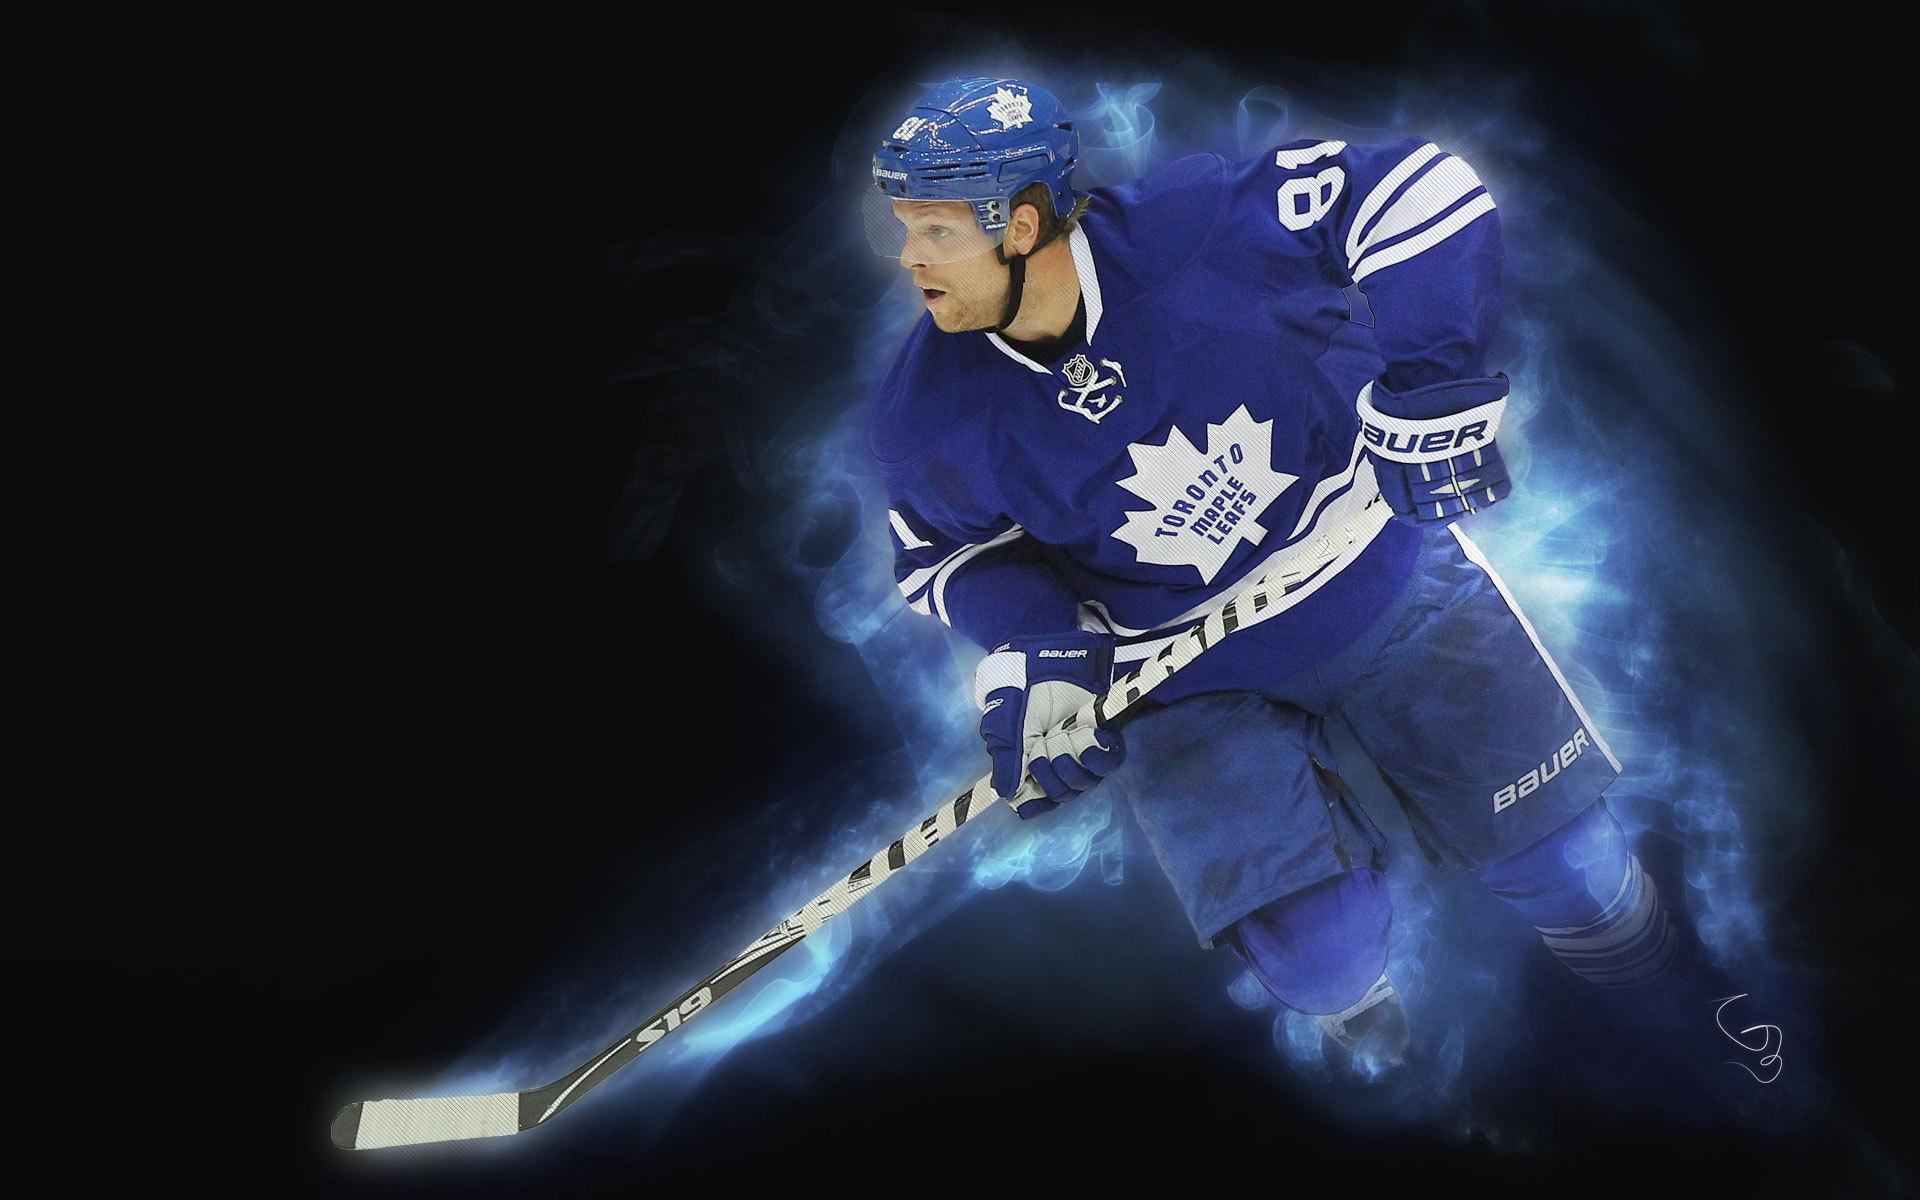 Famous Hockey player Toronto Phil Kessel wallpaper and image